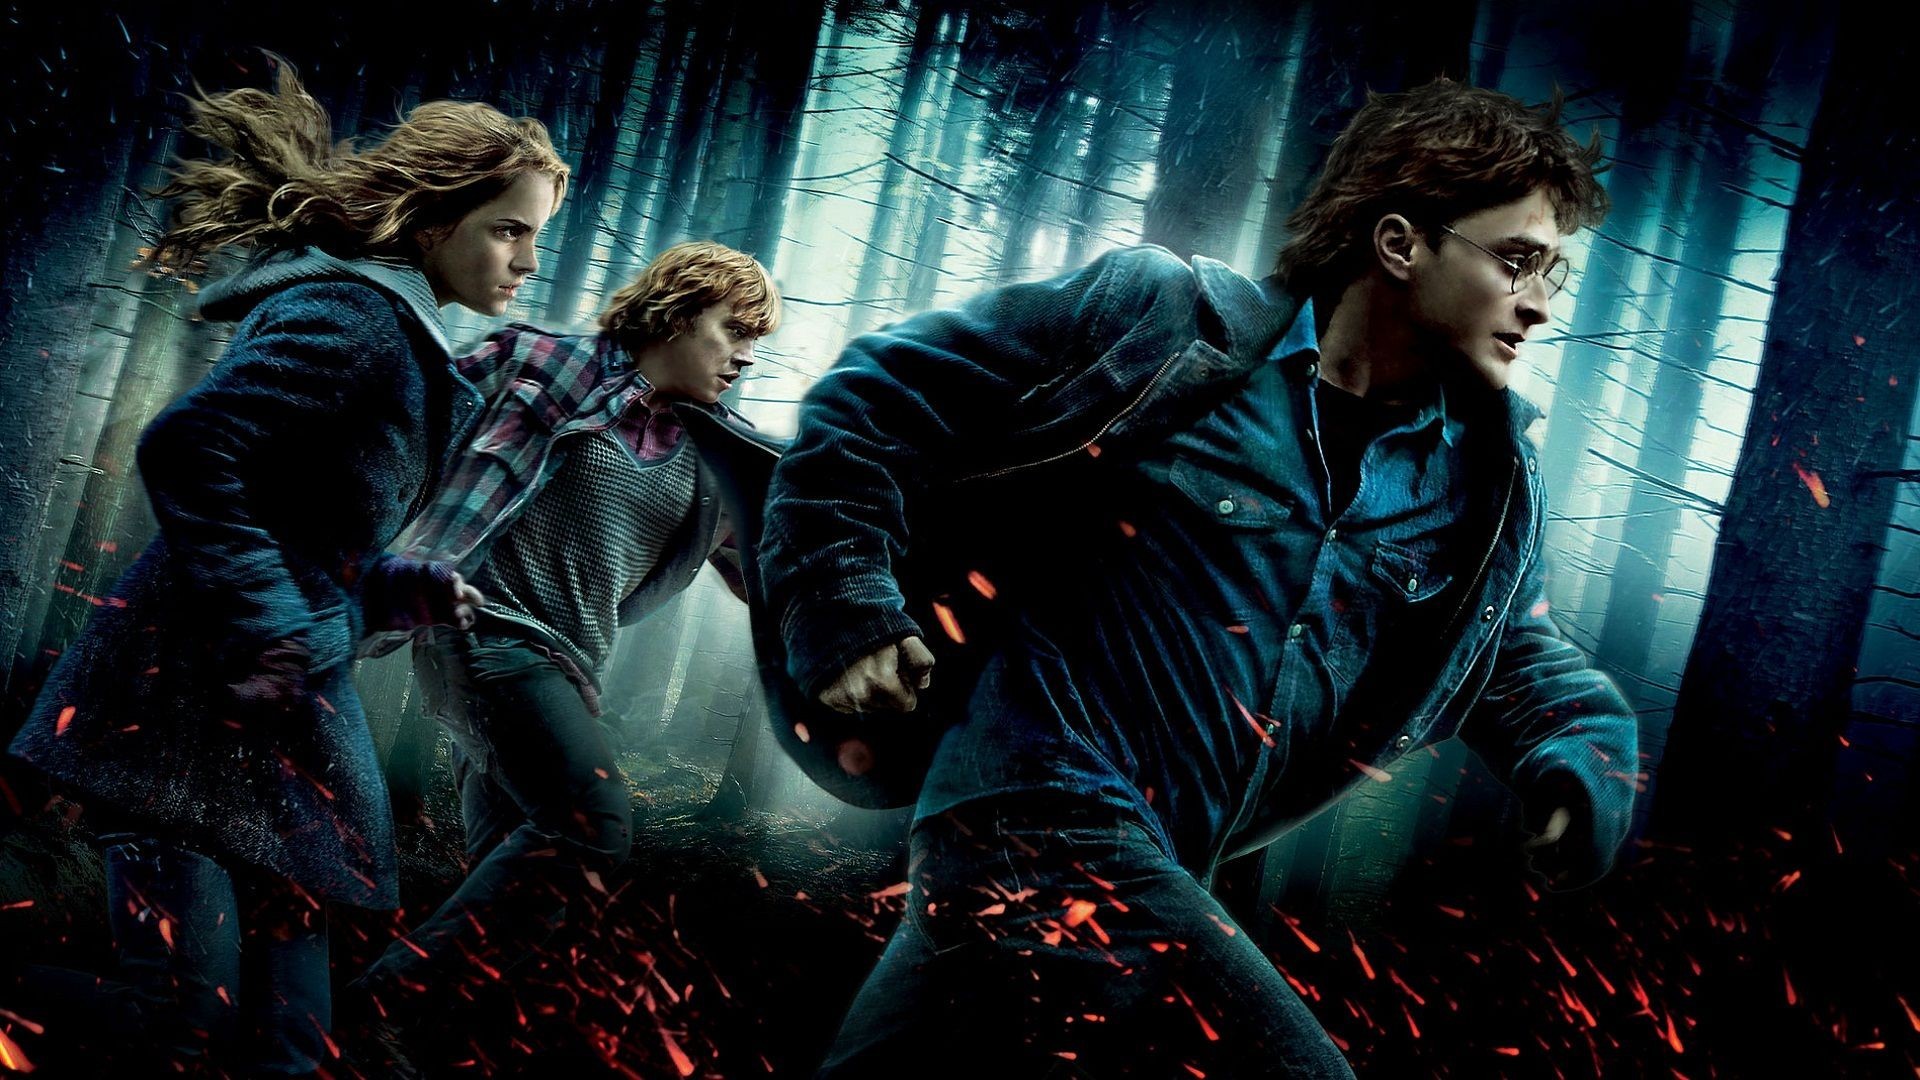 HARRY POTTER DEATHLY HALLOWS t wallpaper 1920x1080 102002